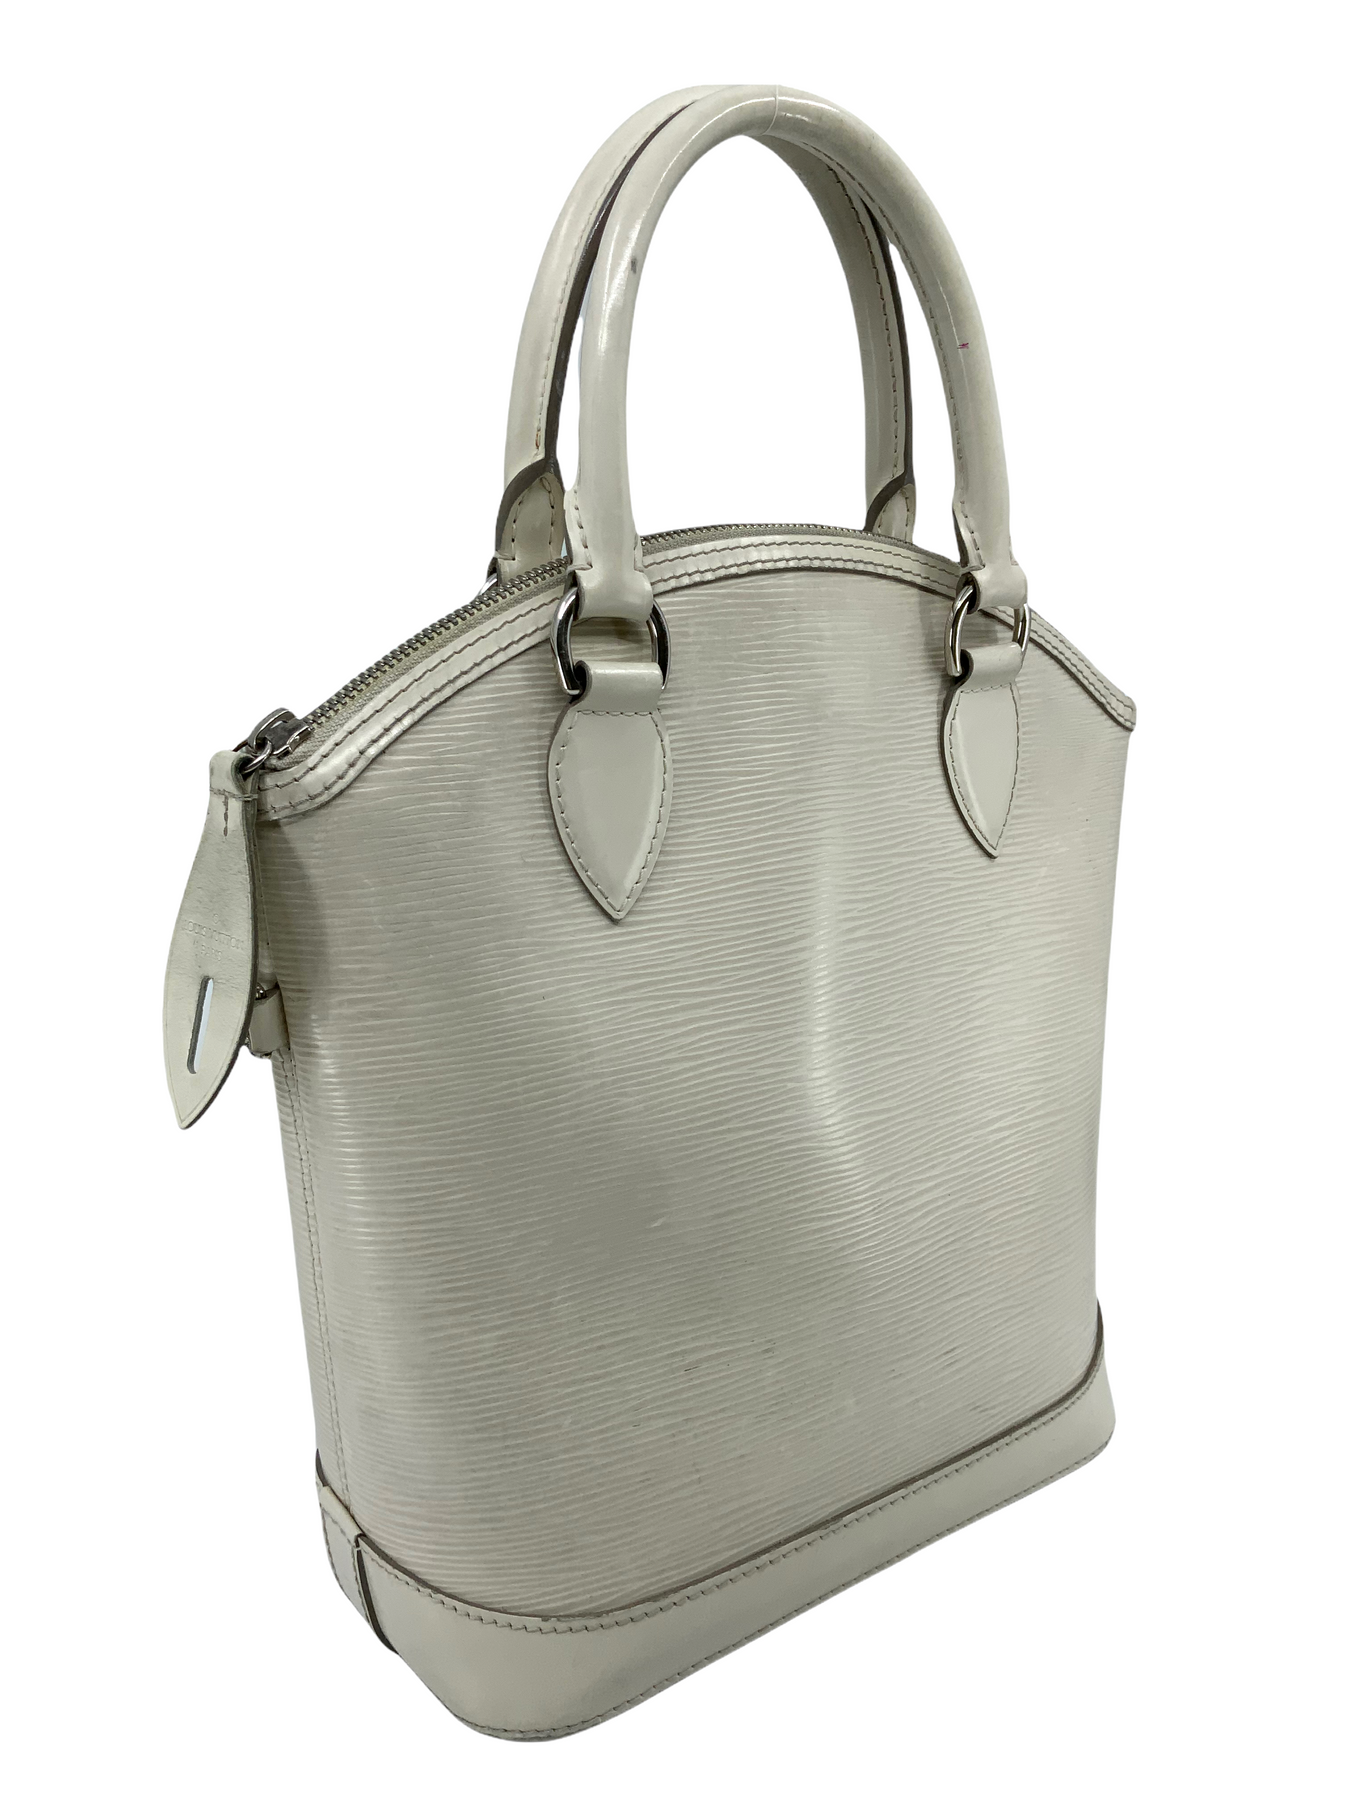 Louis Vuitton 2007 Pre-owned Lockit PM Tote Bag - Silver